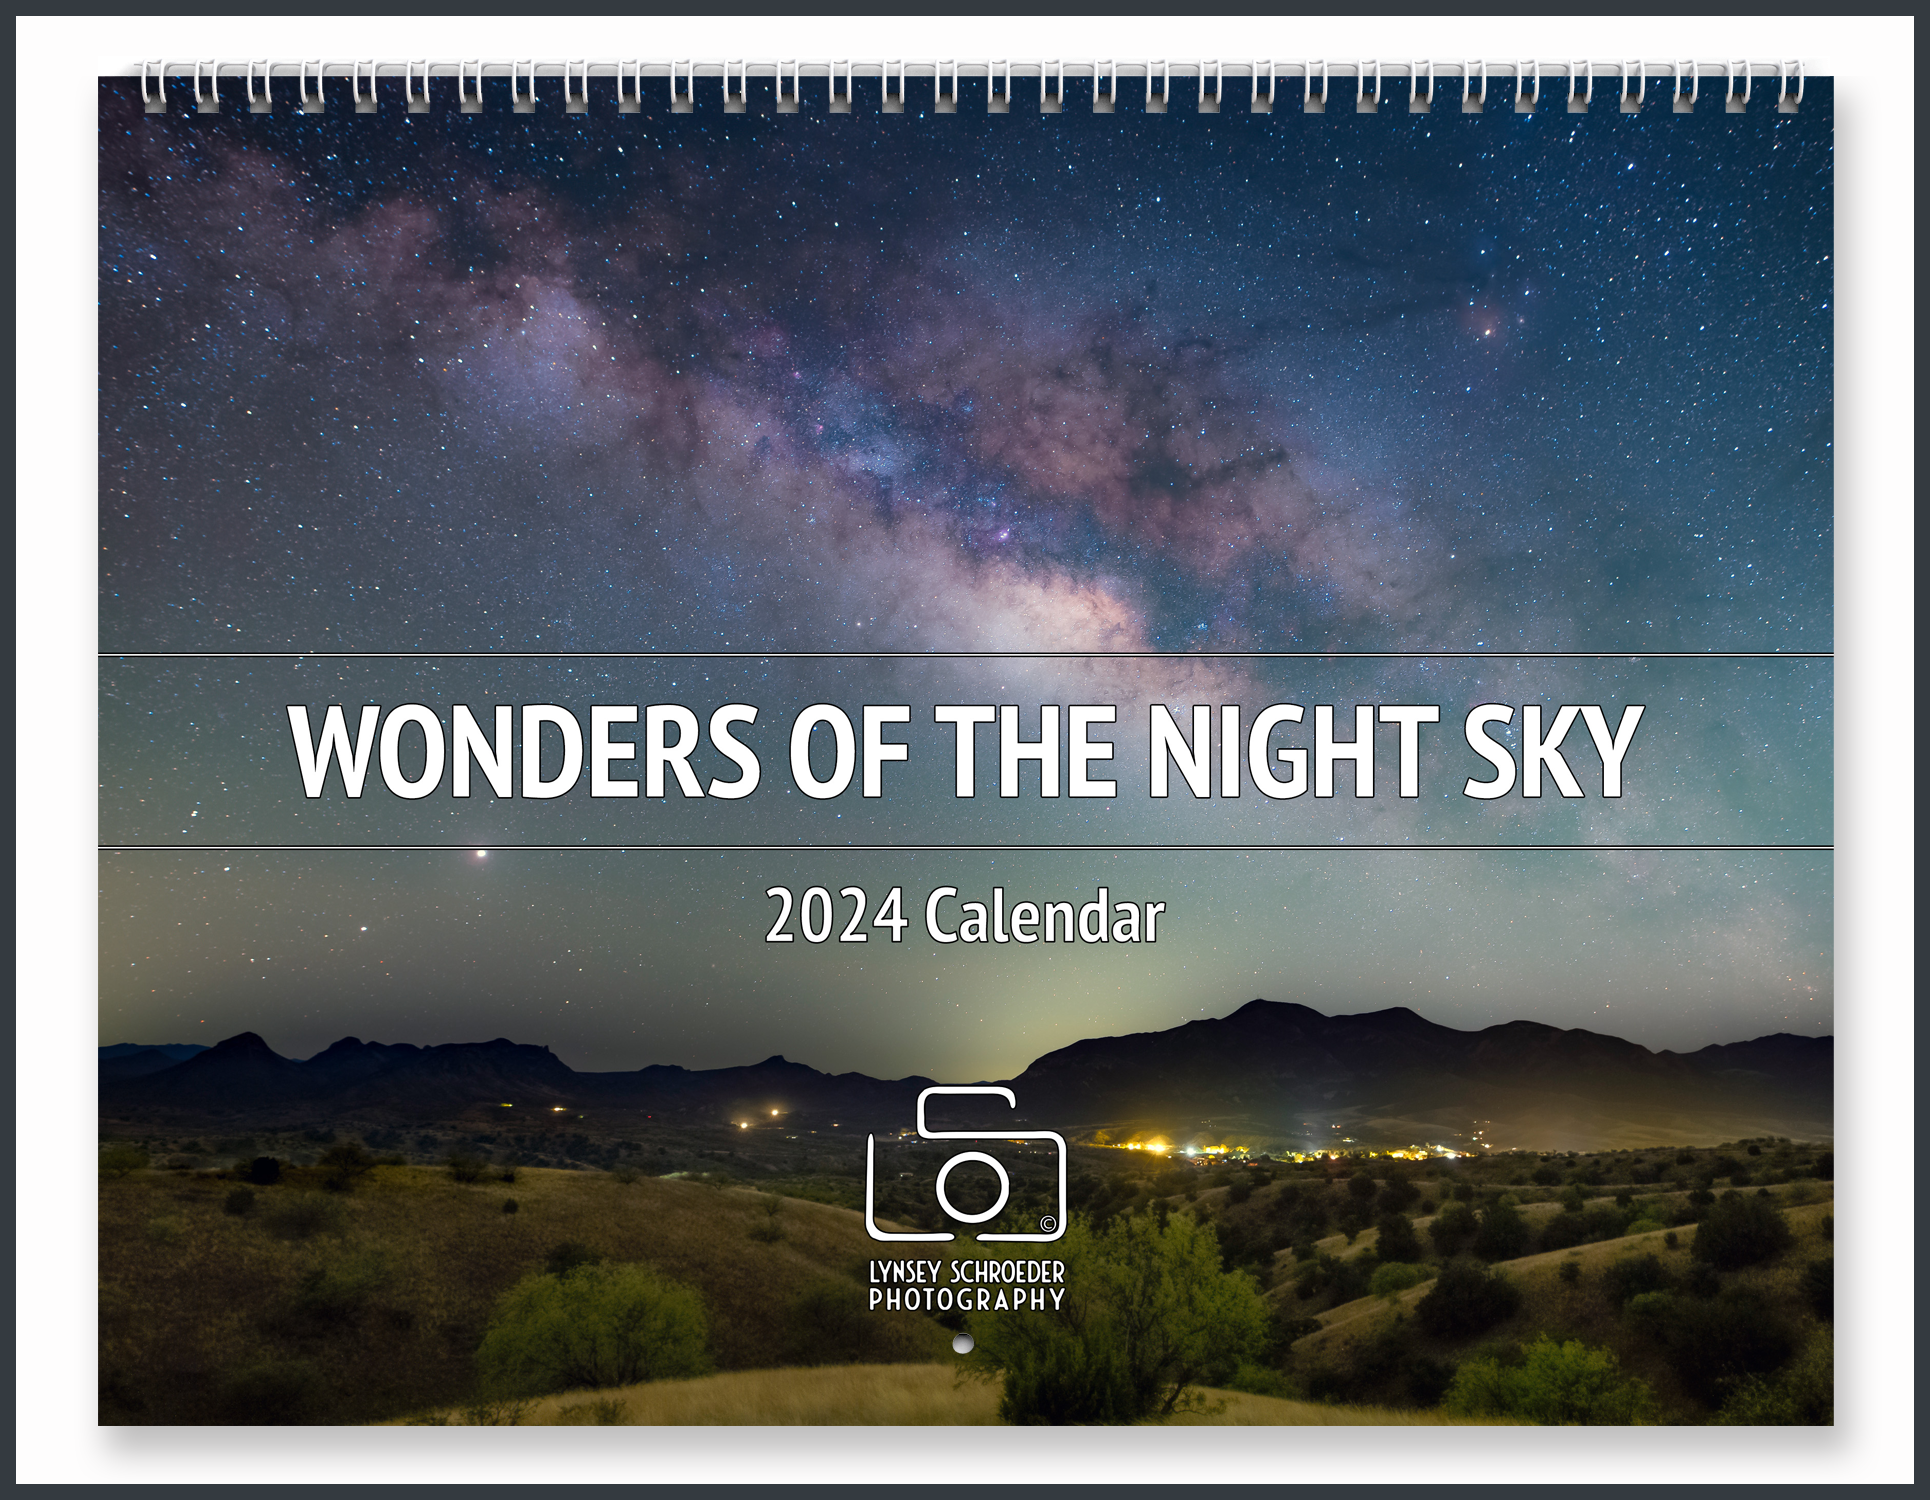 Wonders of the Night Sky front view